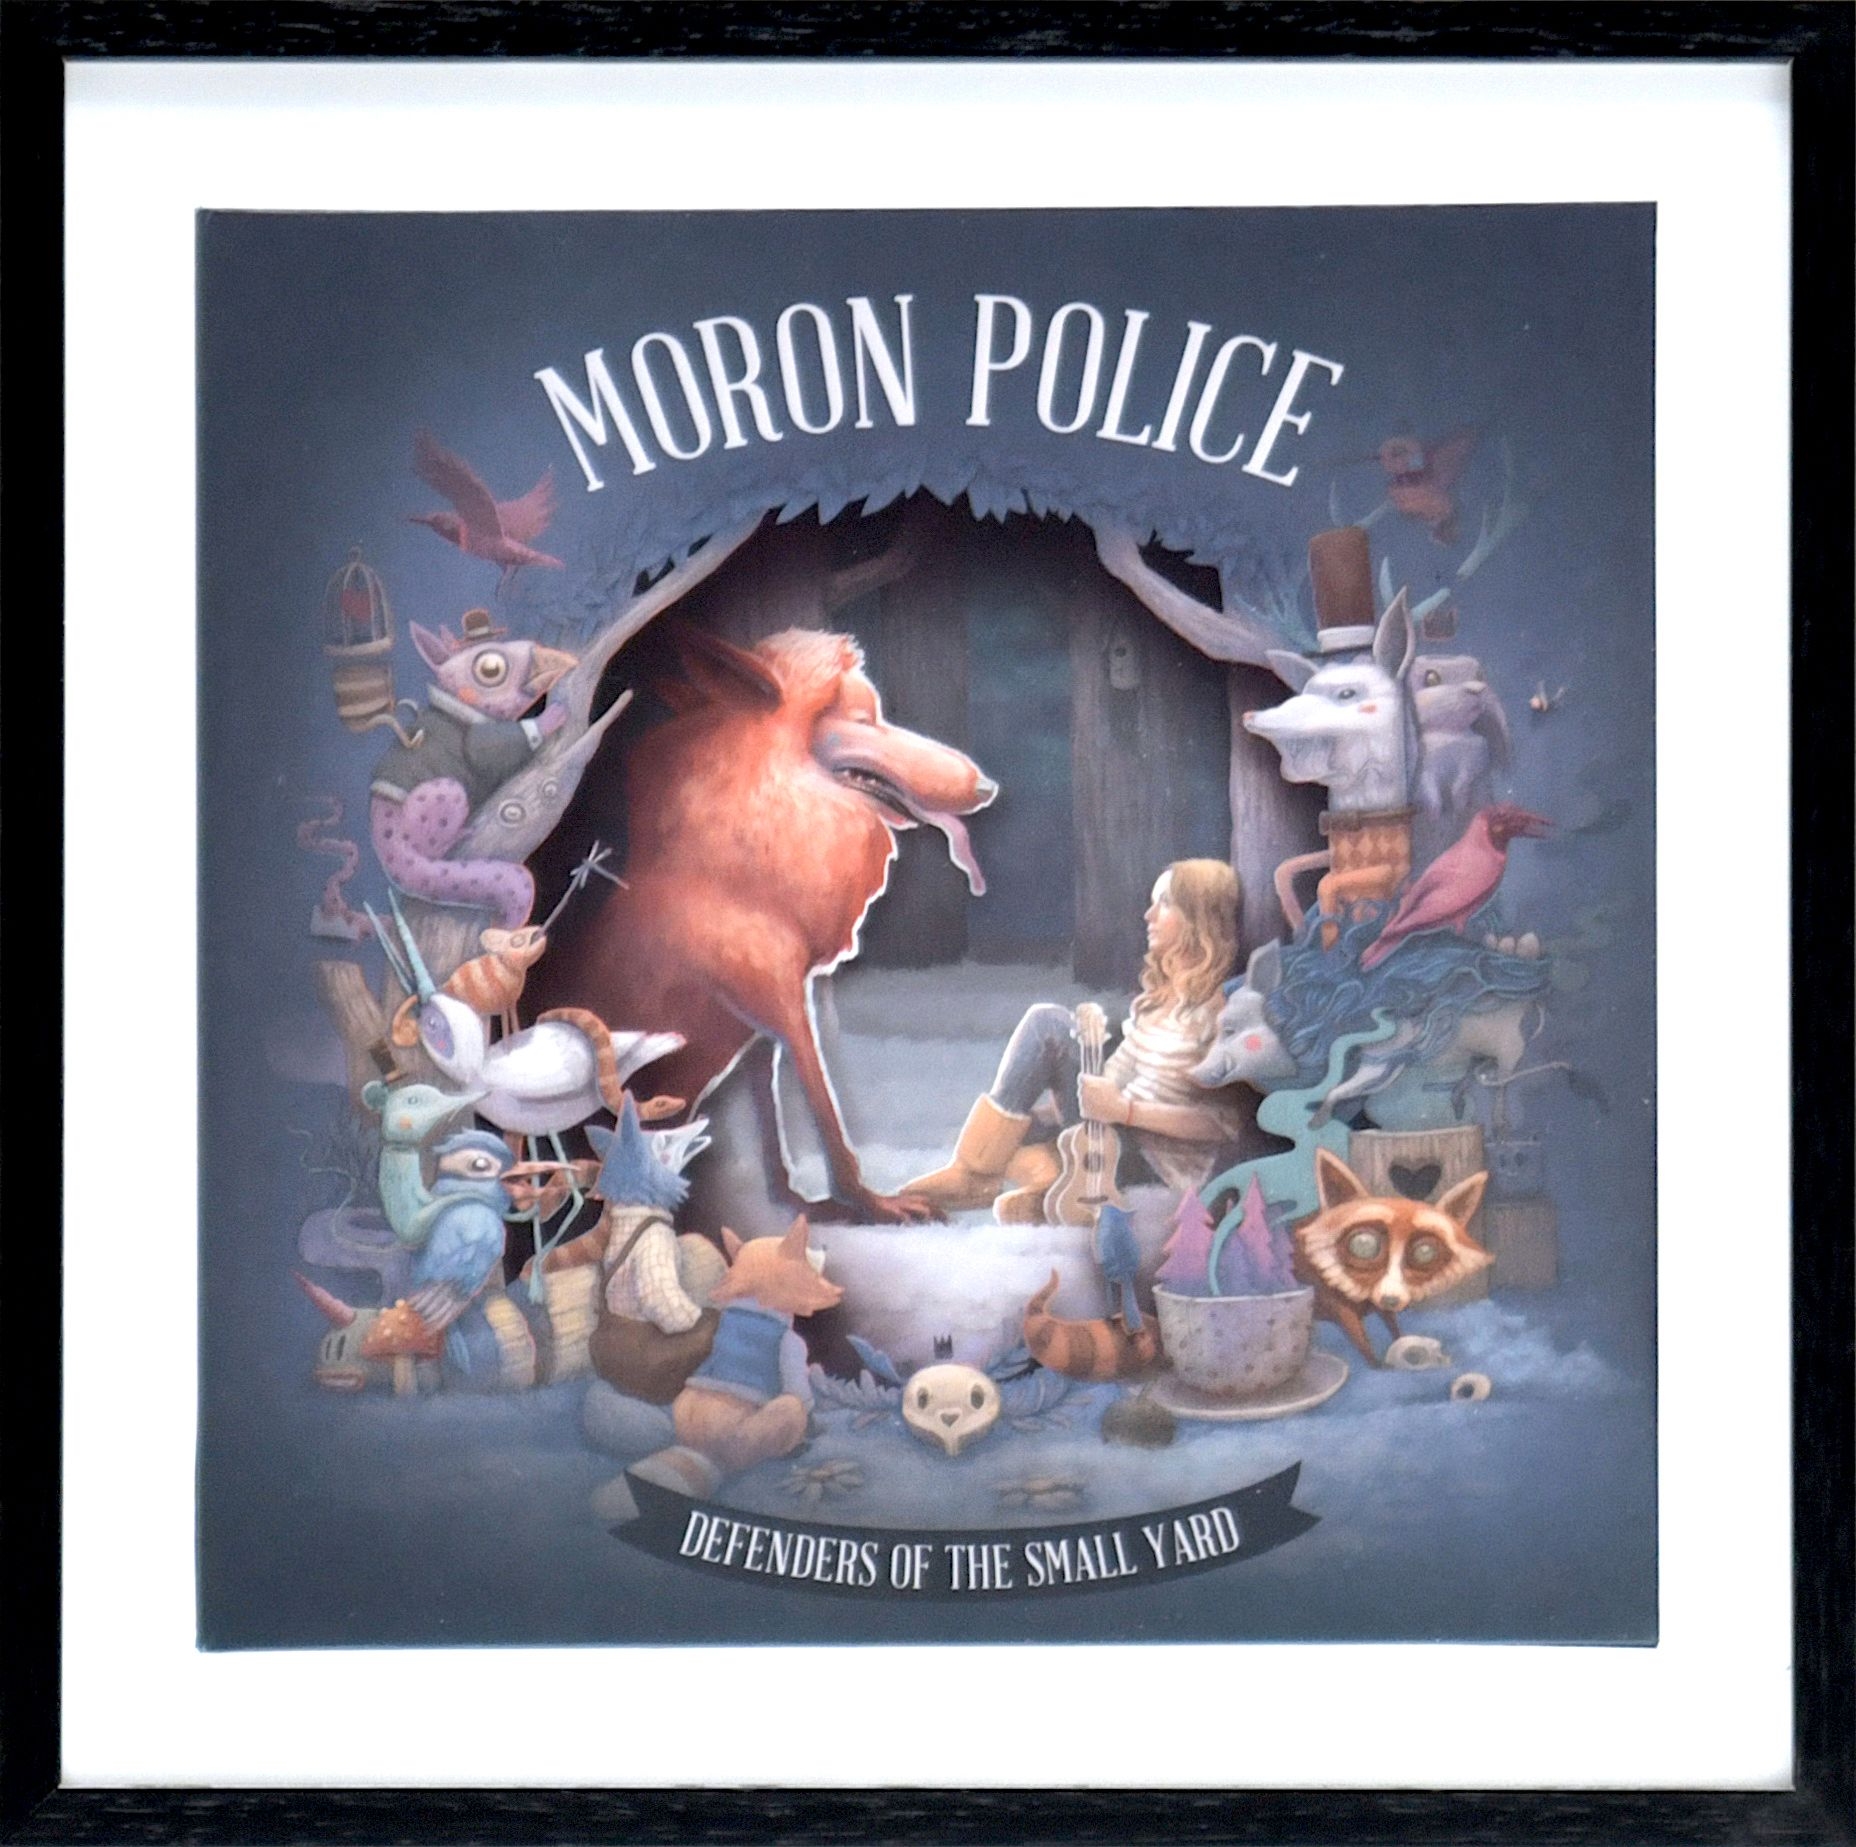 Moron Police - Defenders of the Small Yard by Dulk, 2014